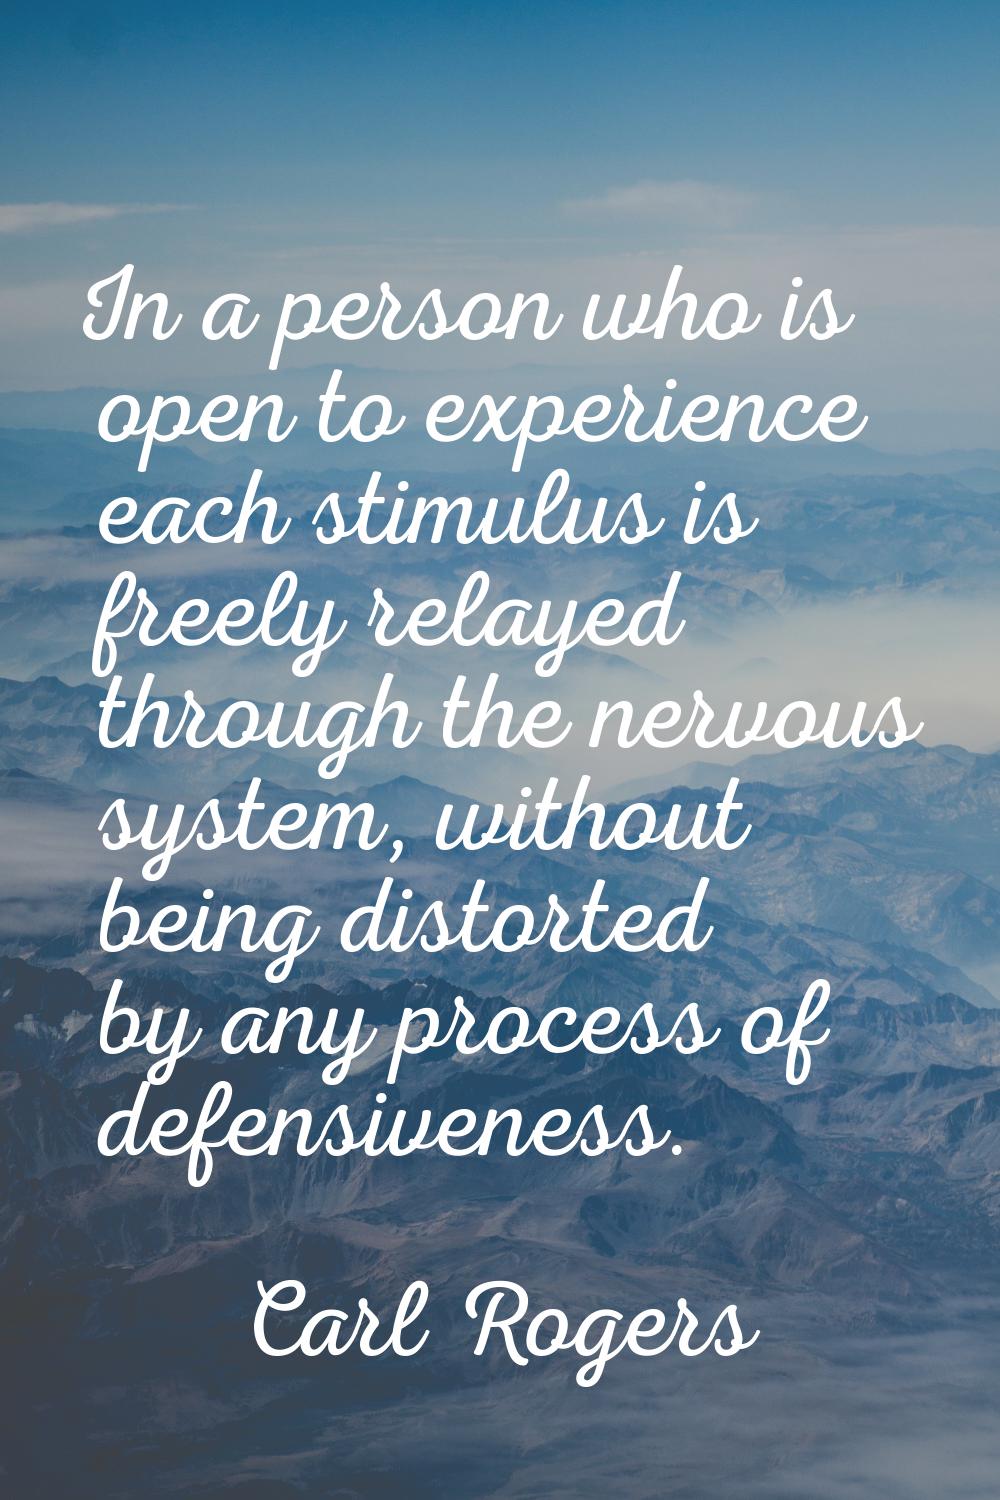 In a person who is open to experience each stimulus is freely relayed through the nervous system, w